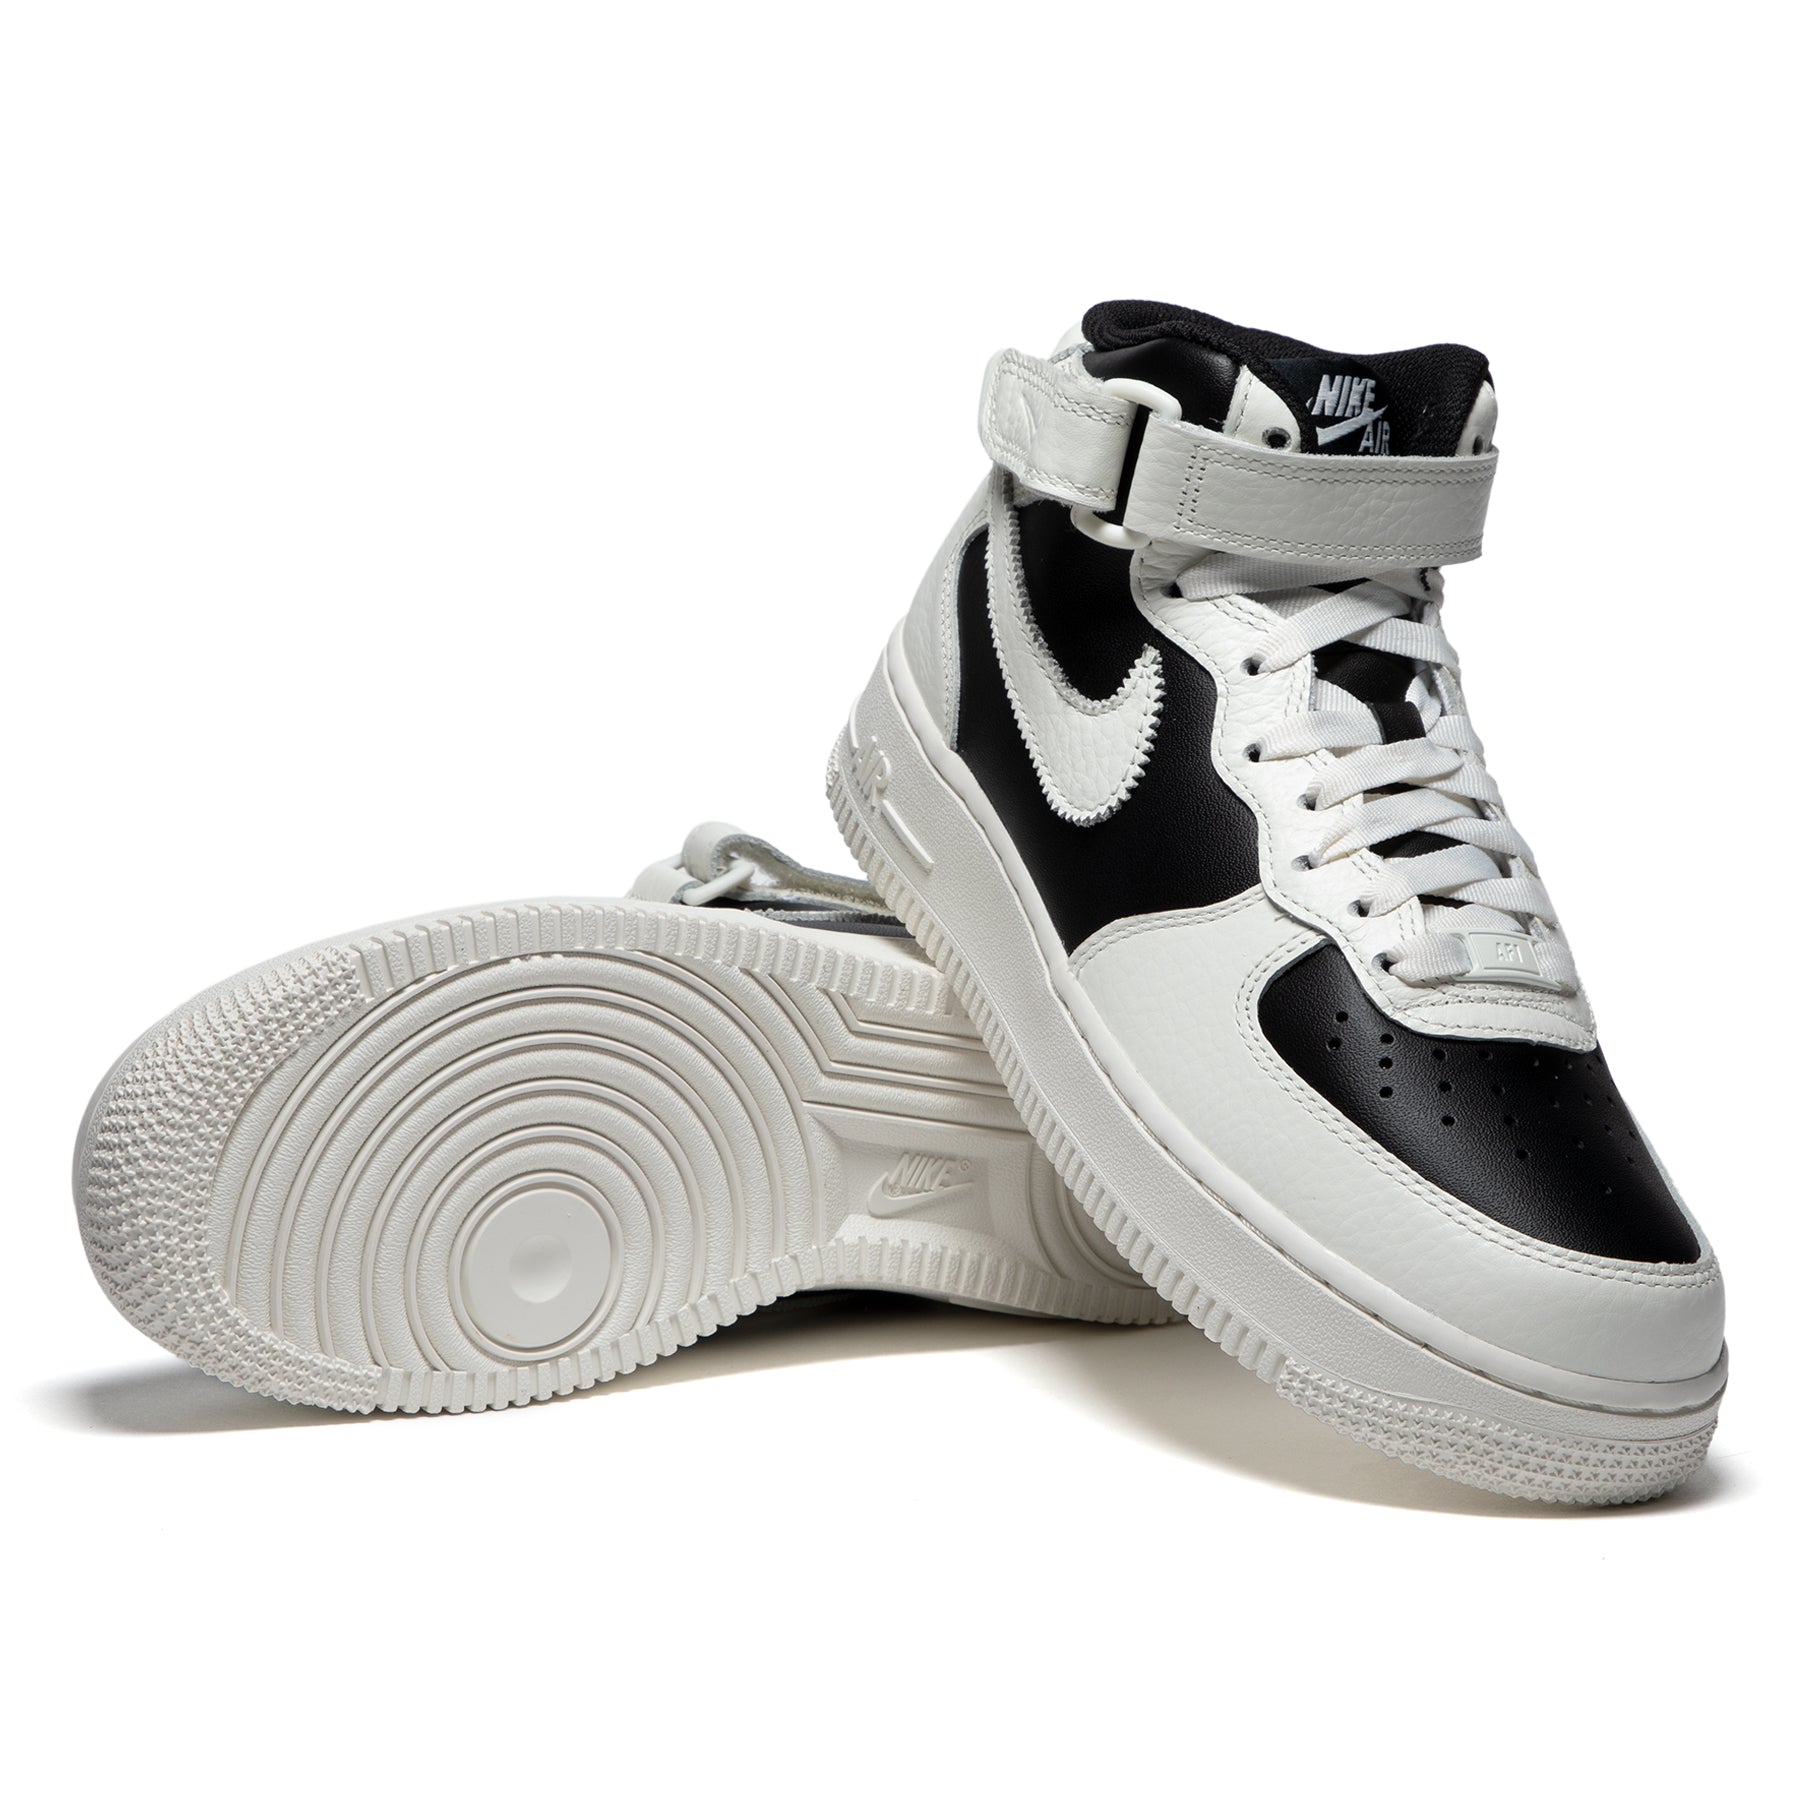 Nike Women's Air Force 1 '07 Mid Shoes